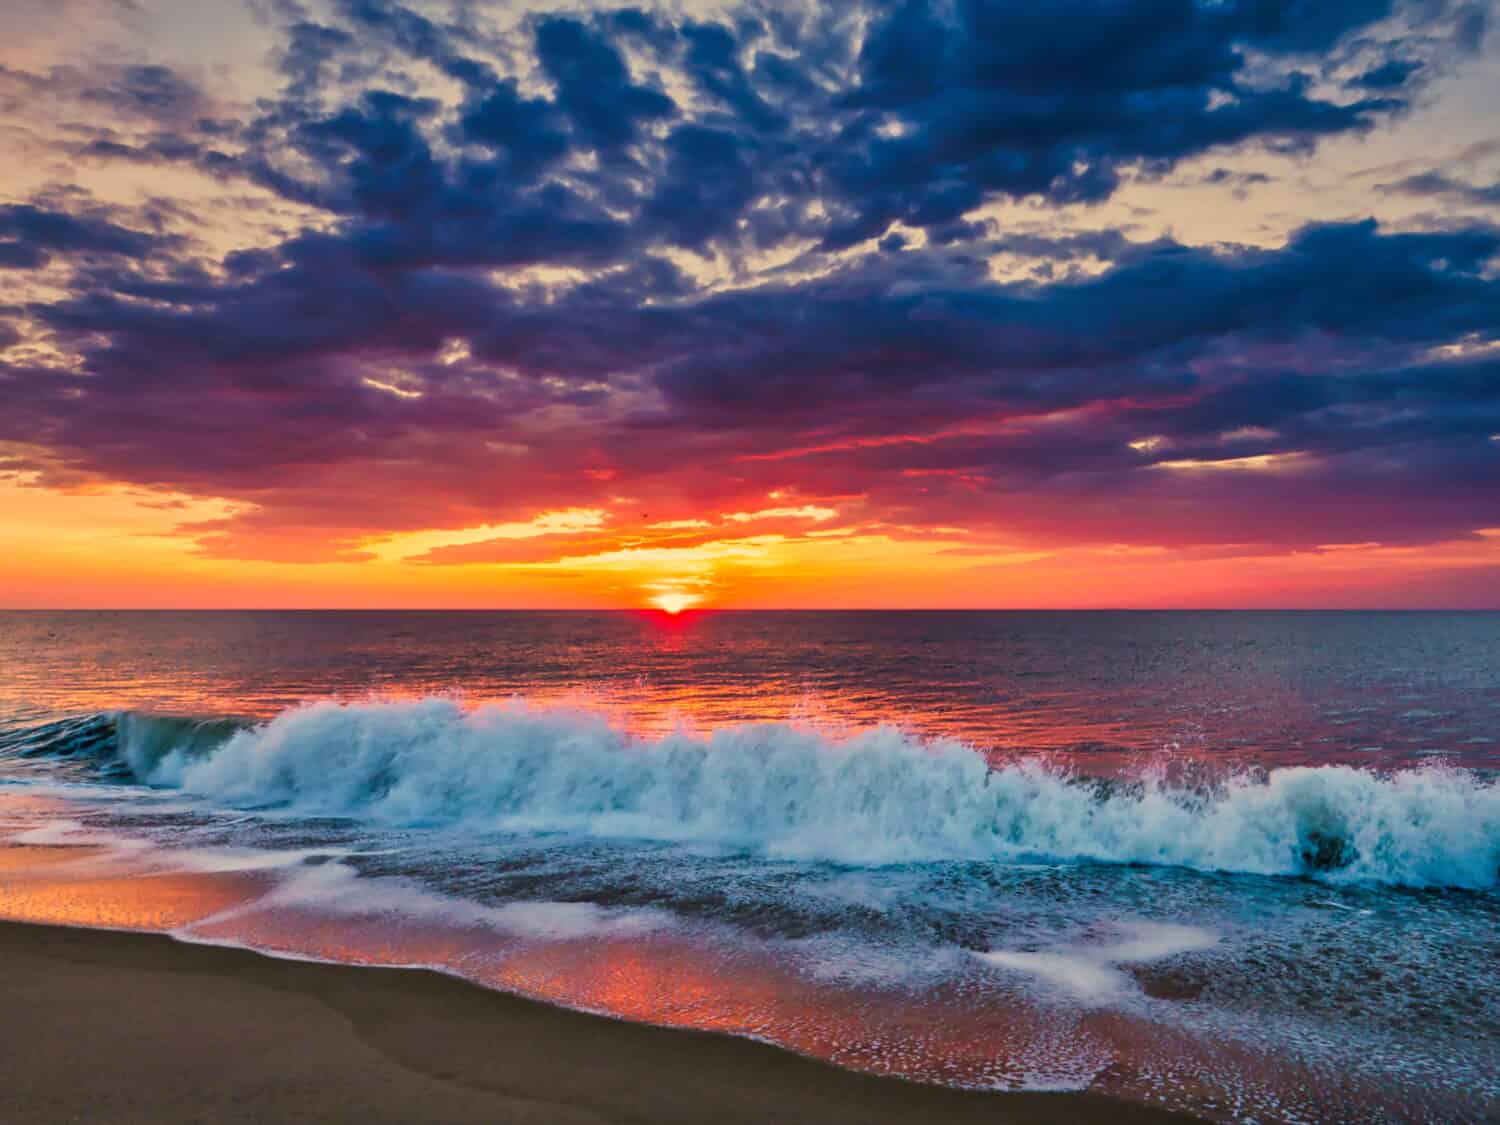 Sunrise from the Bethany Beach, Delaware, with dramatic skycap and surf.